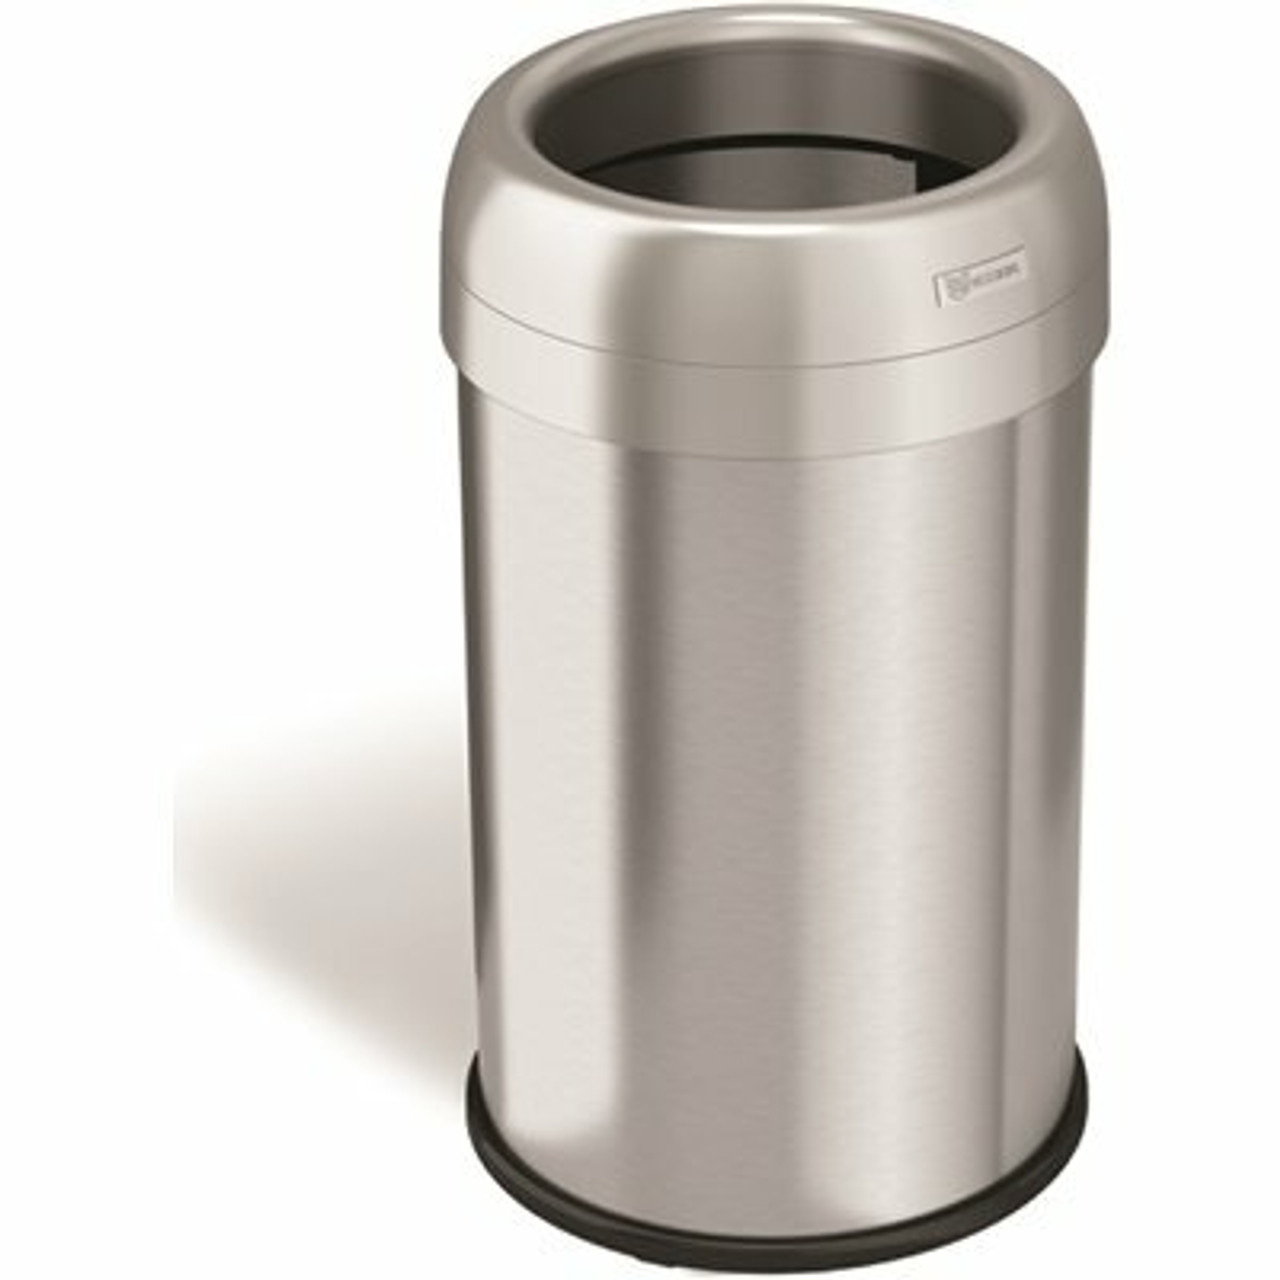 Hls Commercial 13 Gal. Round Open Top Stainless Steel Trash Can With Odor Filters